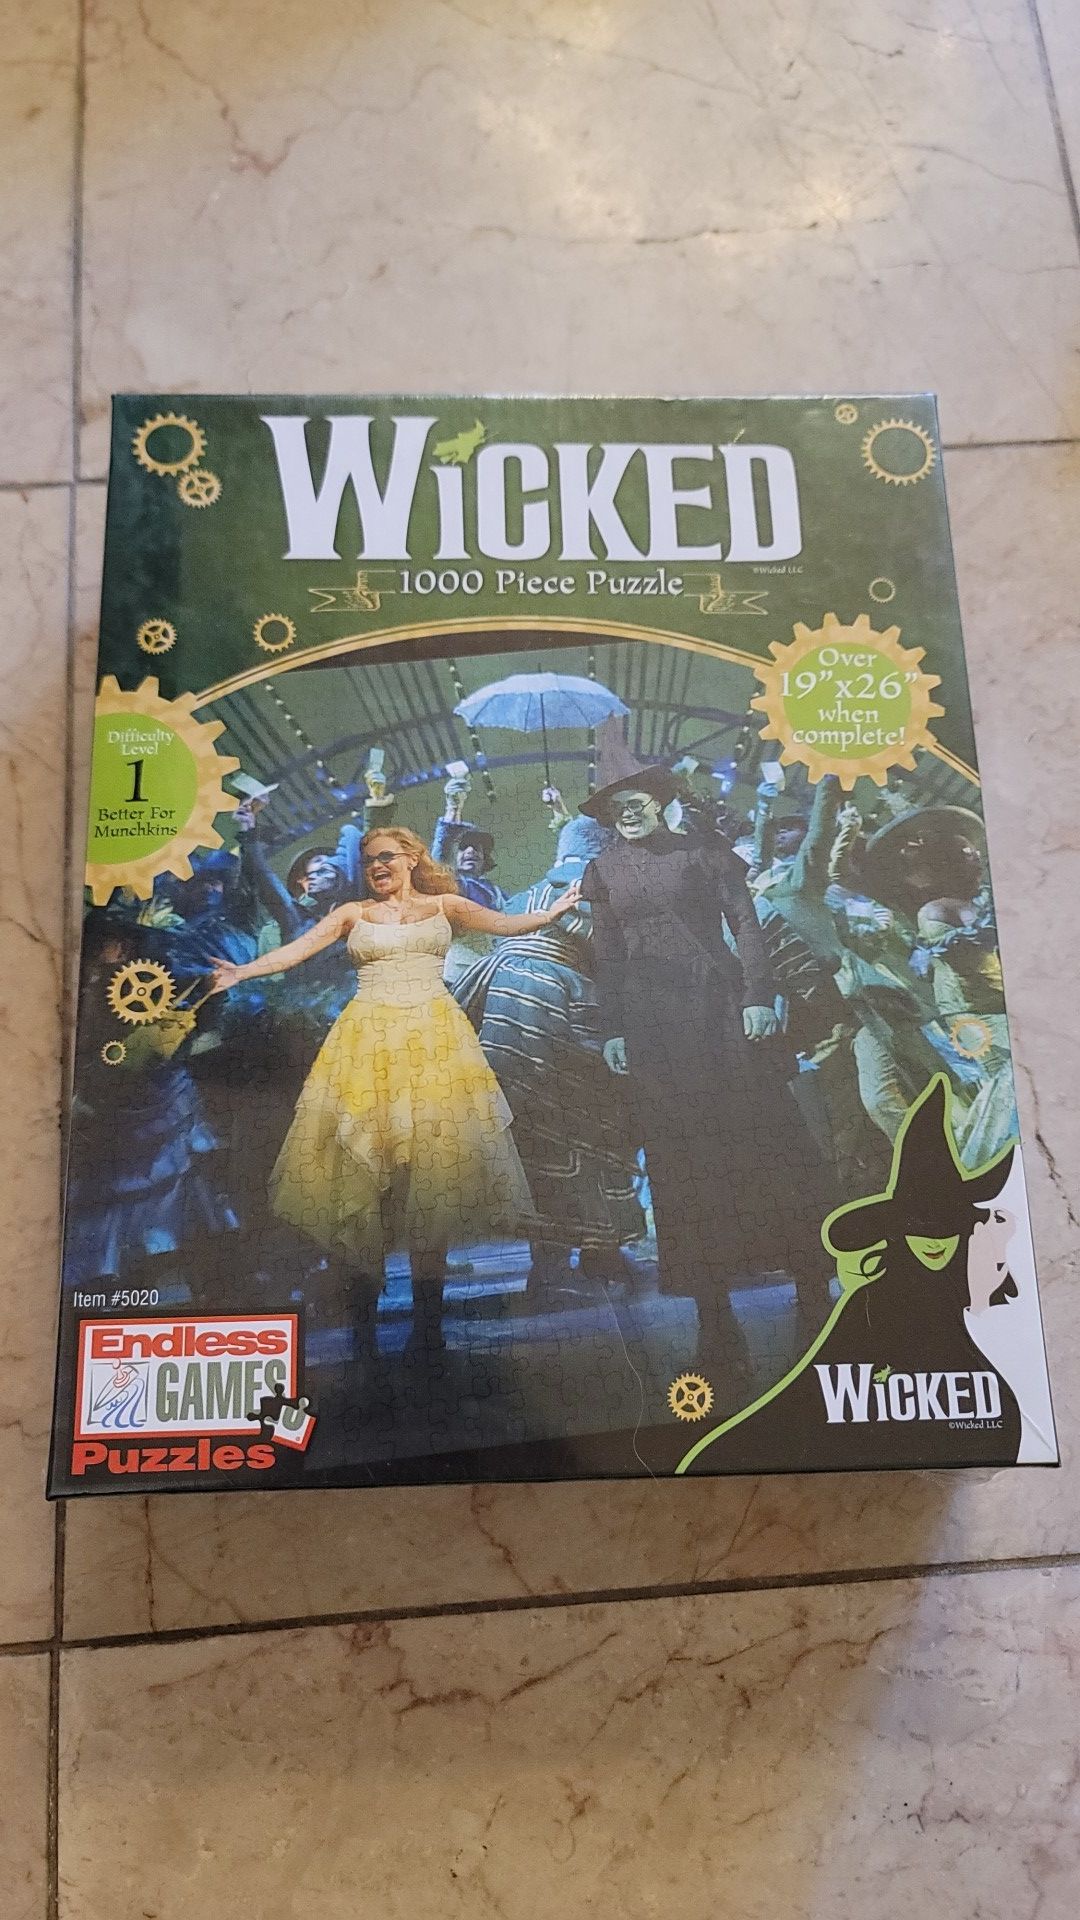 Endless Games Puzzles - Wicked 1000 Piece Puzzle (BRAND NEW)